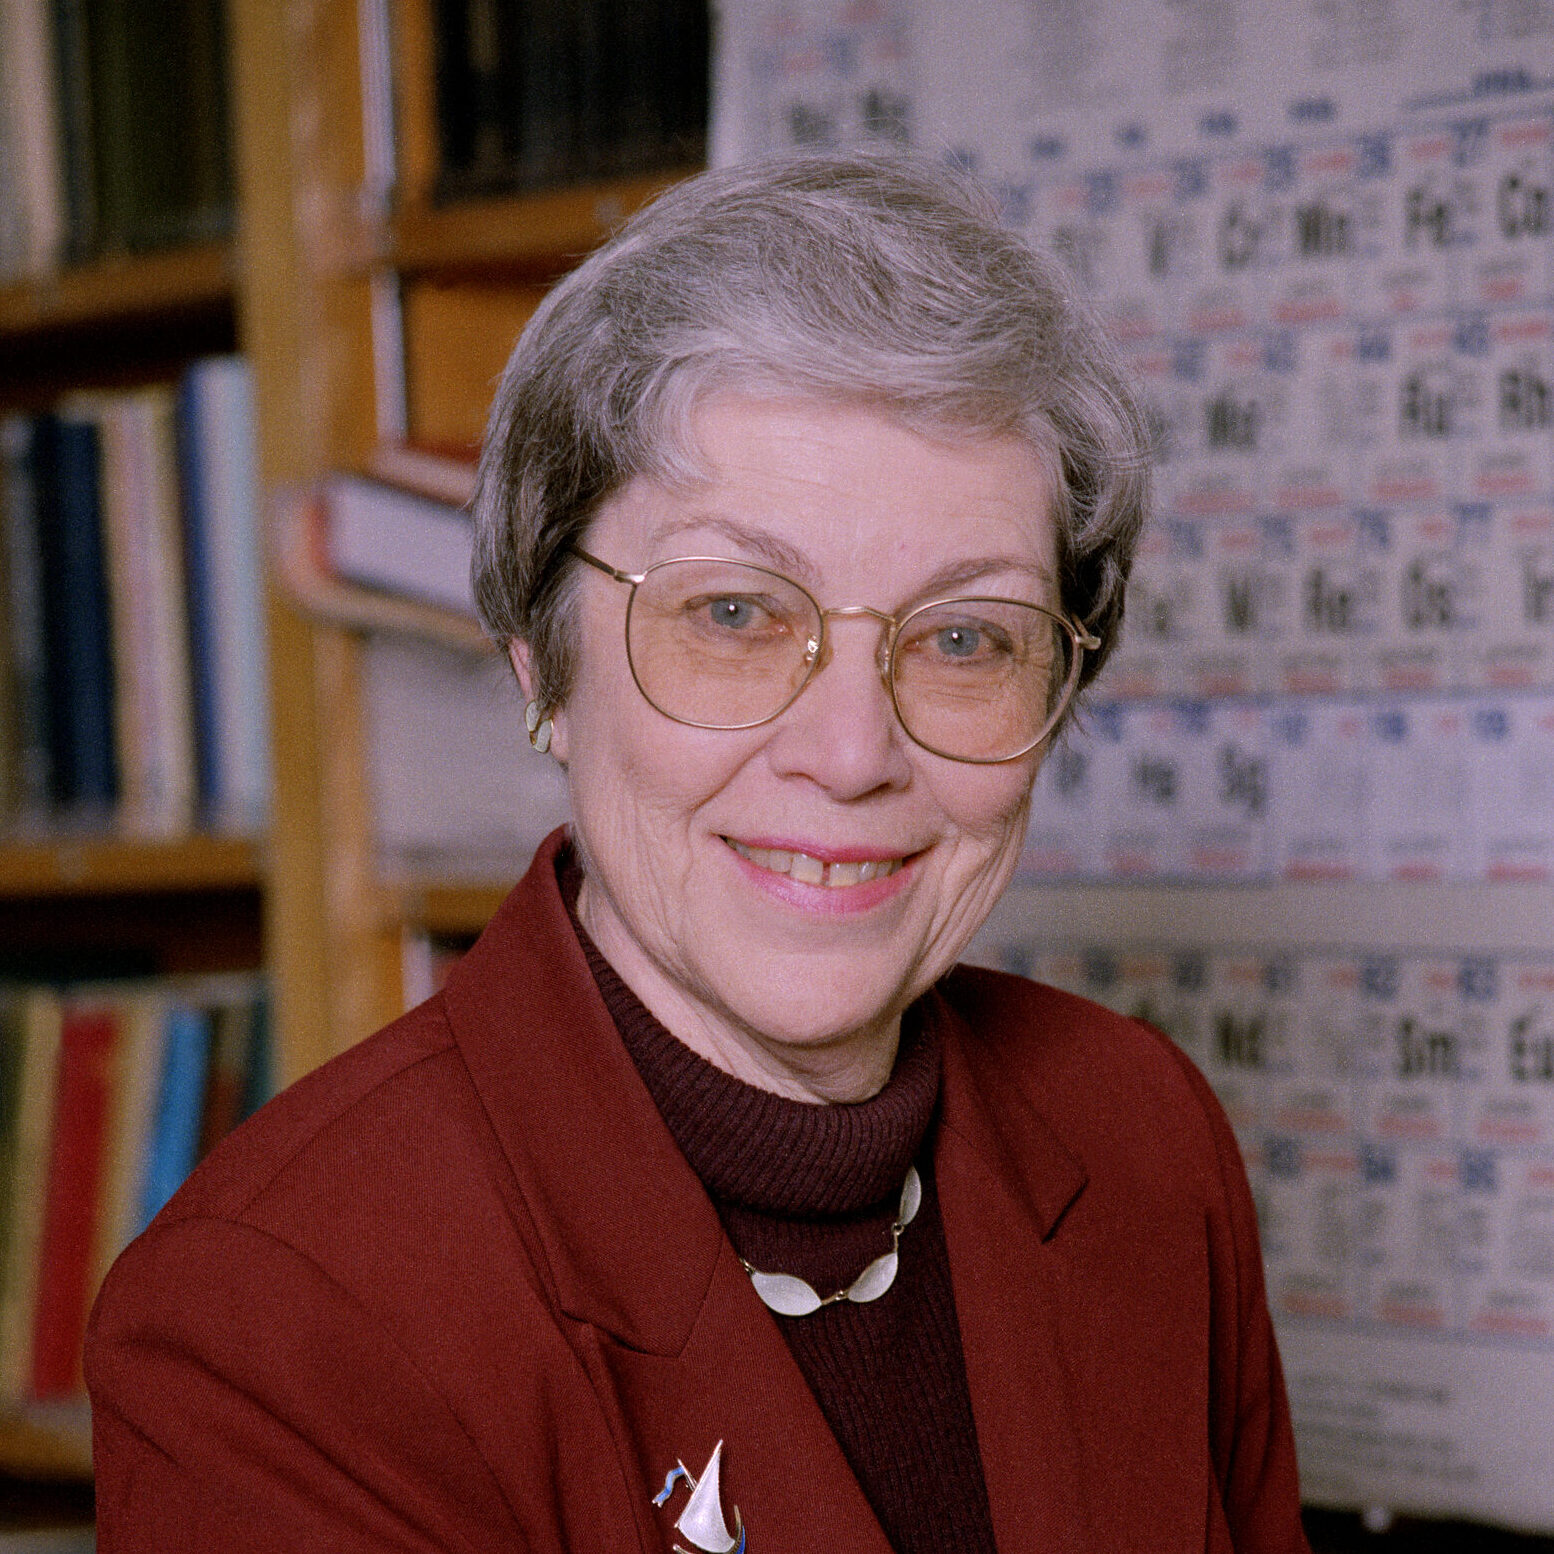 Darleane Hoffman, a light-haired person wearing a red suit, smiles next to a periodic table chart.